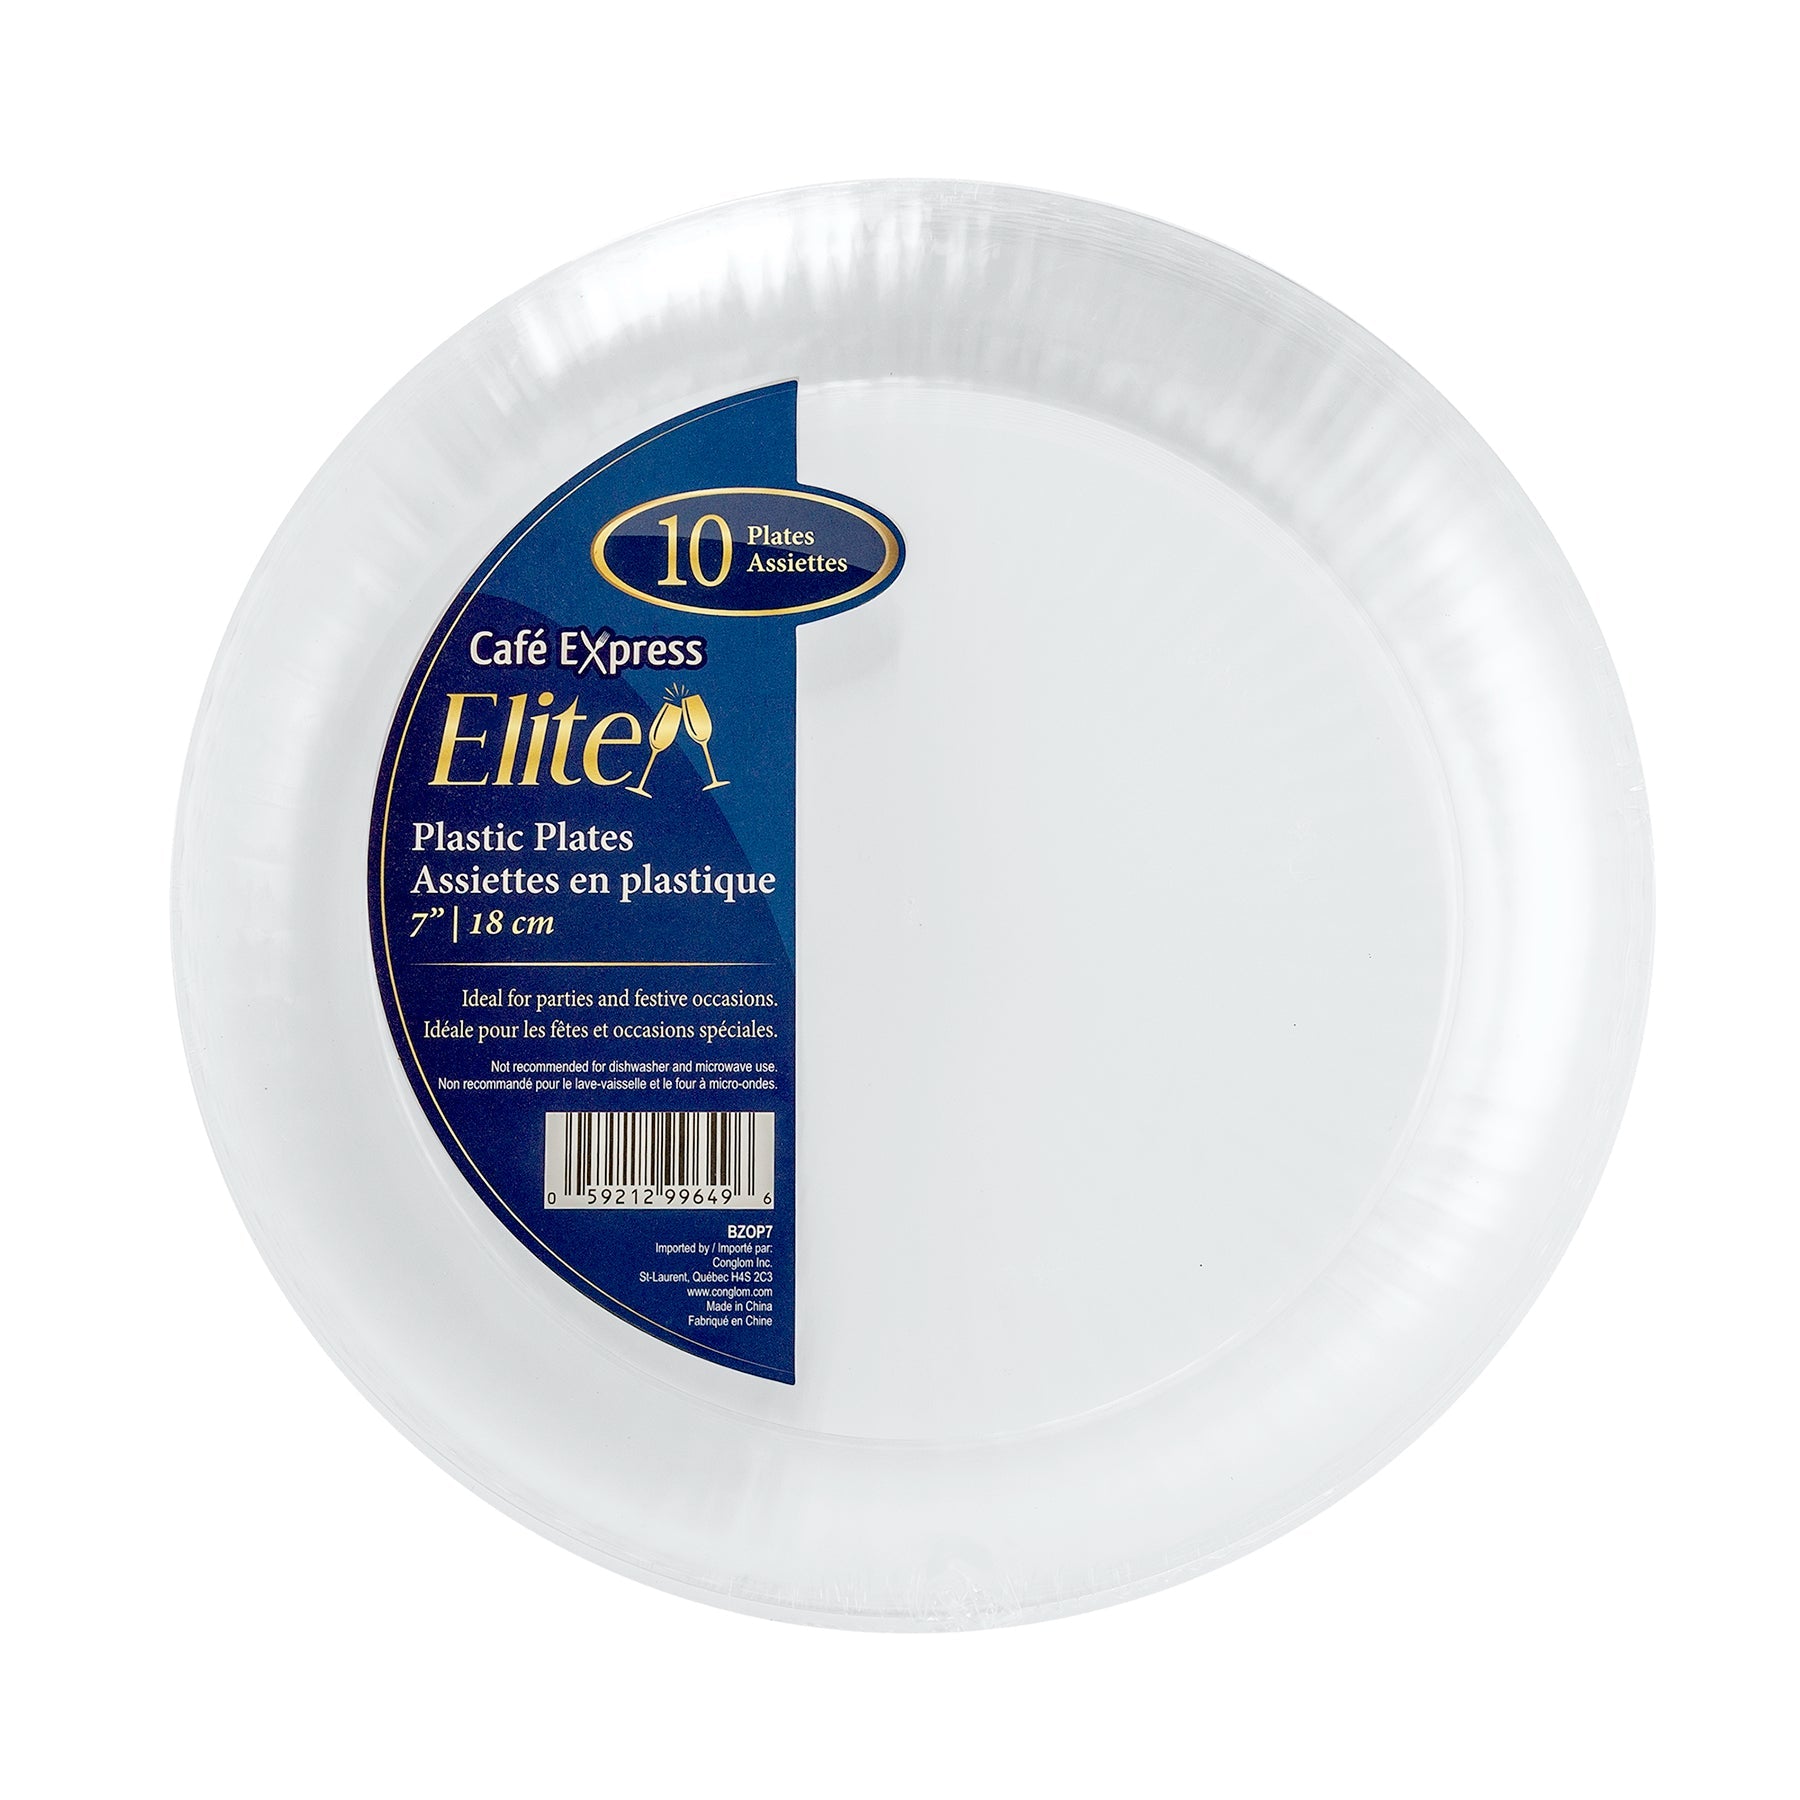 Café Express Elite 10 Round Plates Clear Plastic 7in